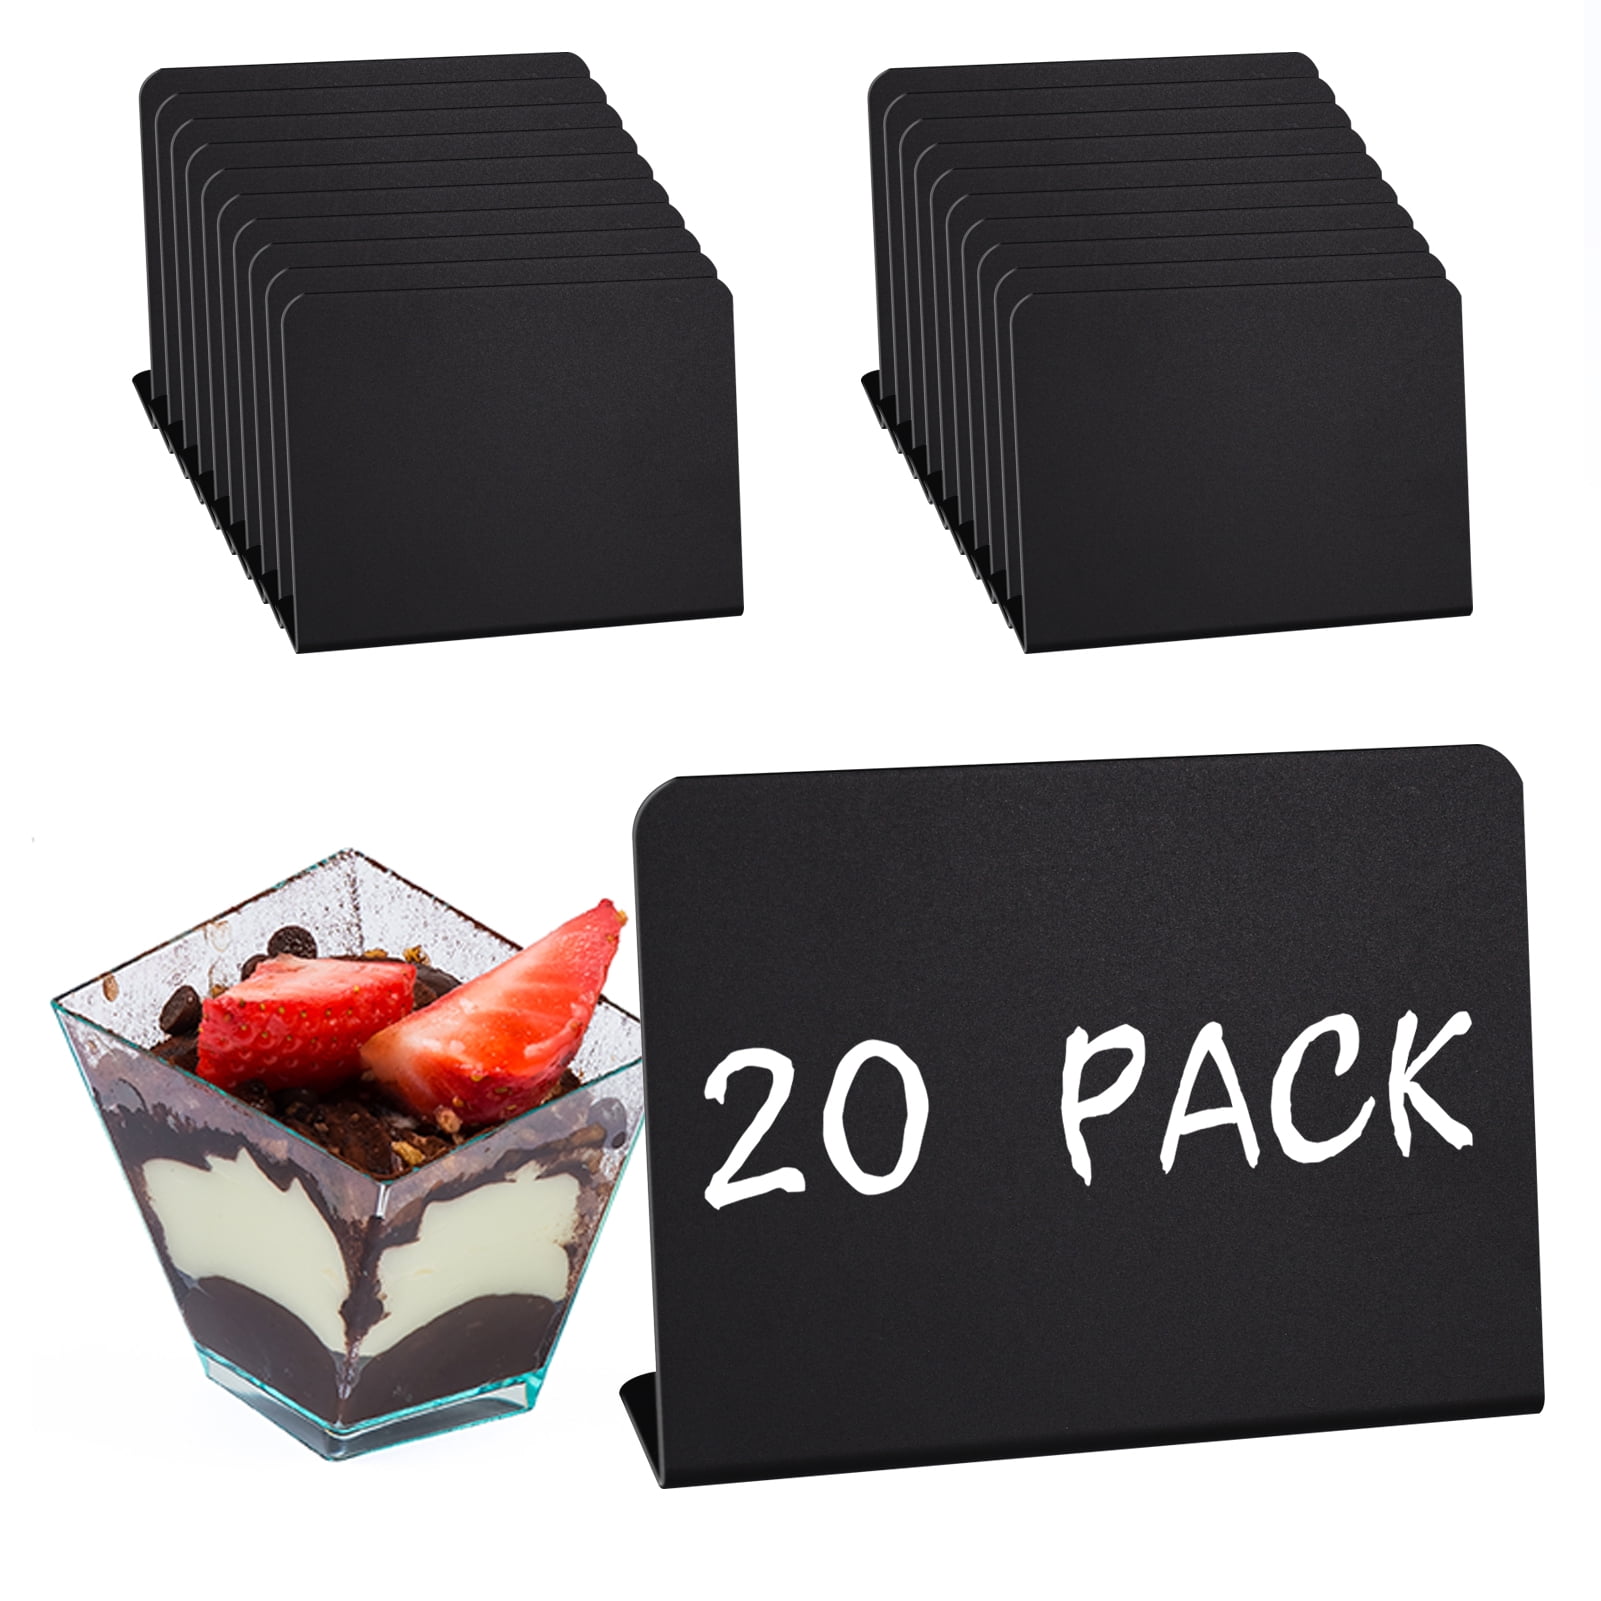  Small Slate Chalkboard Mini Chalk Board Small Chalkboard with  Frames Mini Chalkboard Signs School Supplies for Classroom Party Home  Office Wedding Birthday Decoration, 5 x 4 Inch (12 Pcs) : Office Products